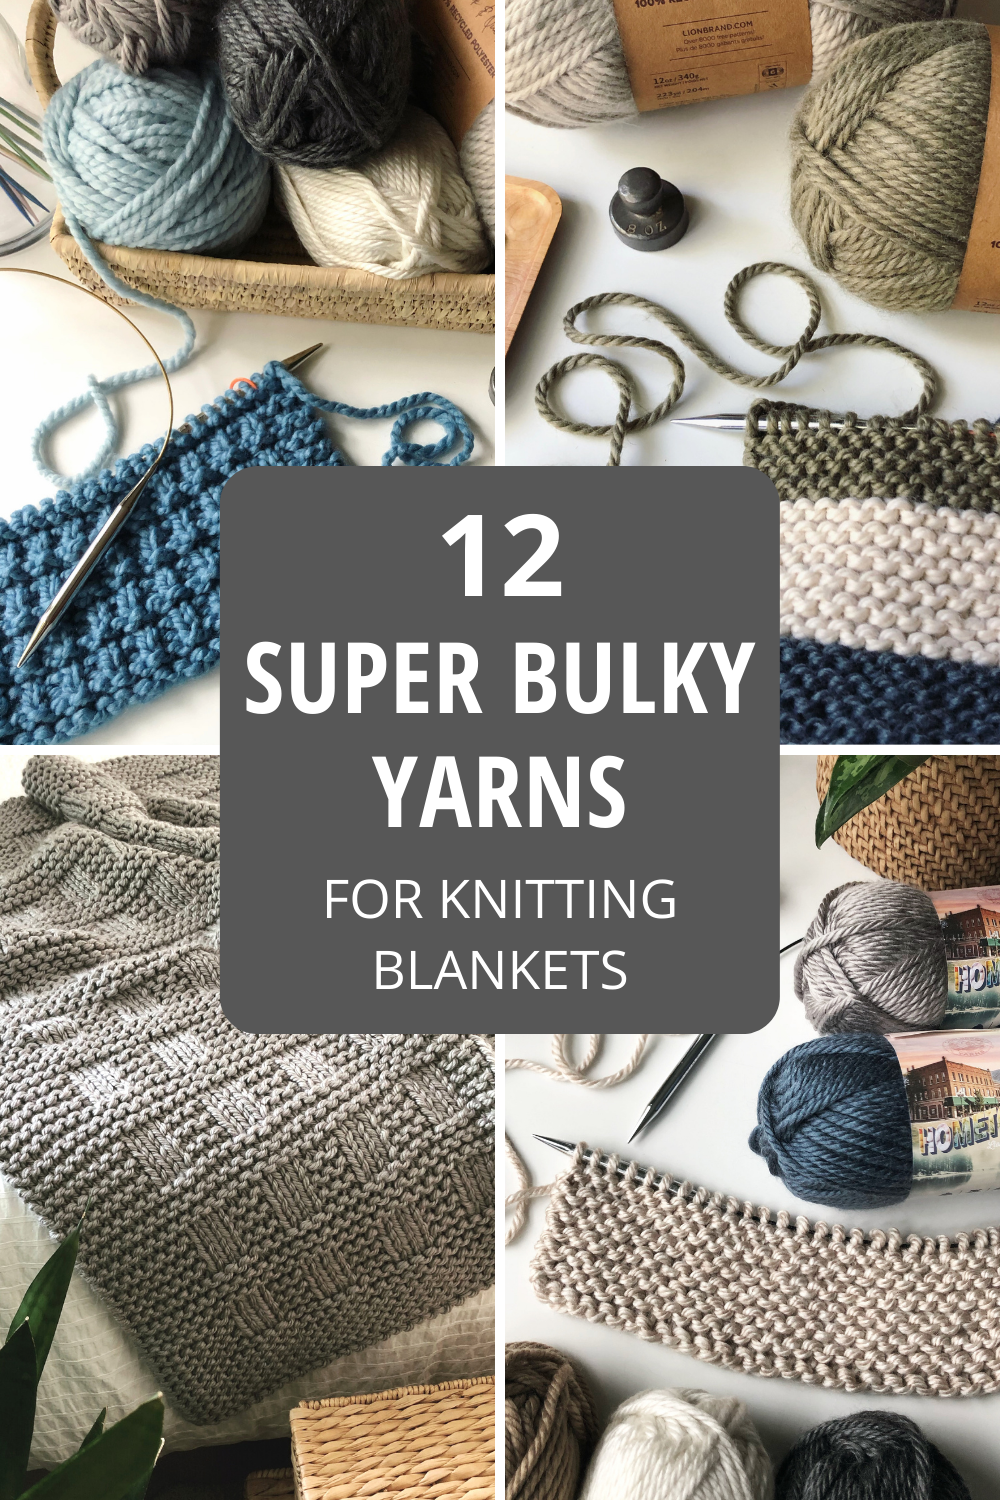 12 Super Bulky Yarns for Knitting Cozy Blankets and Afghans — Fifty Four  Ten Studio